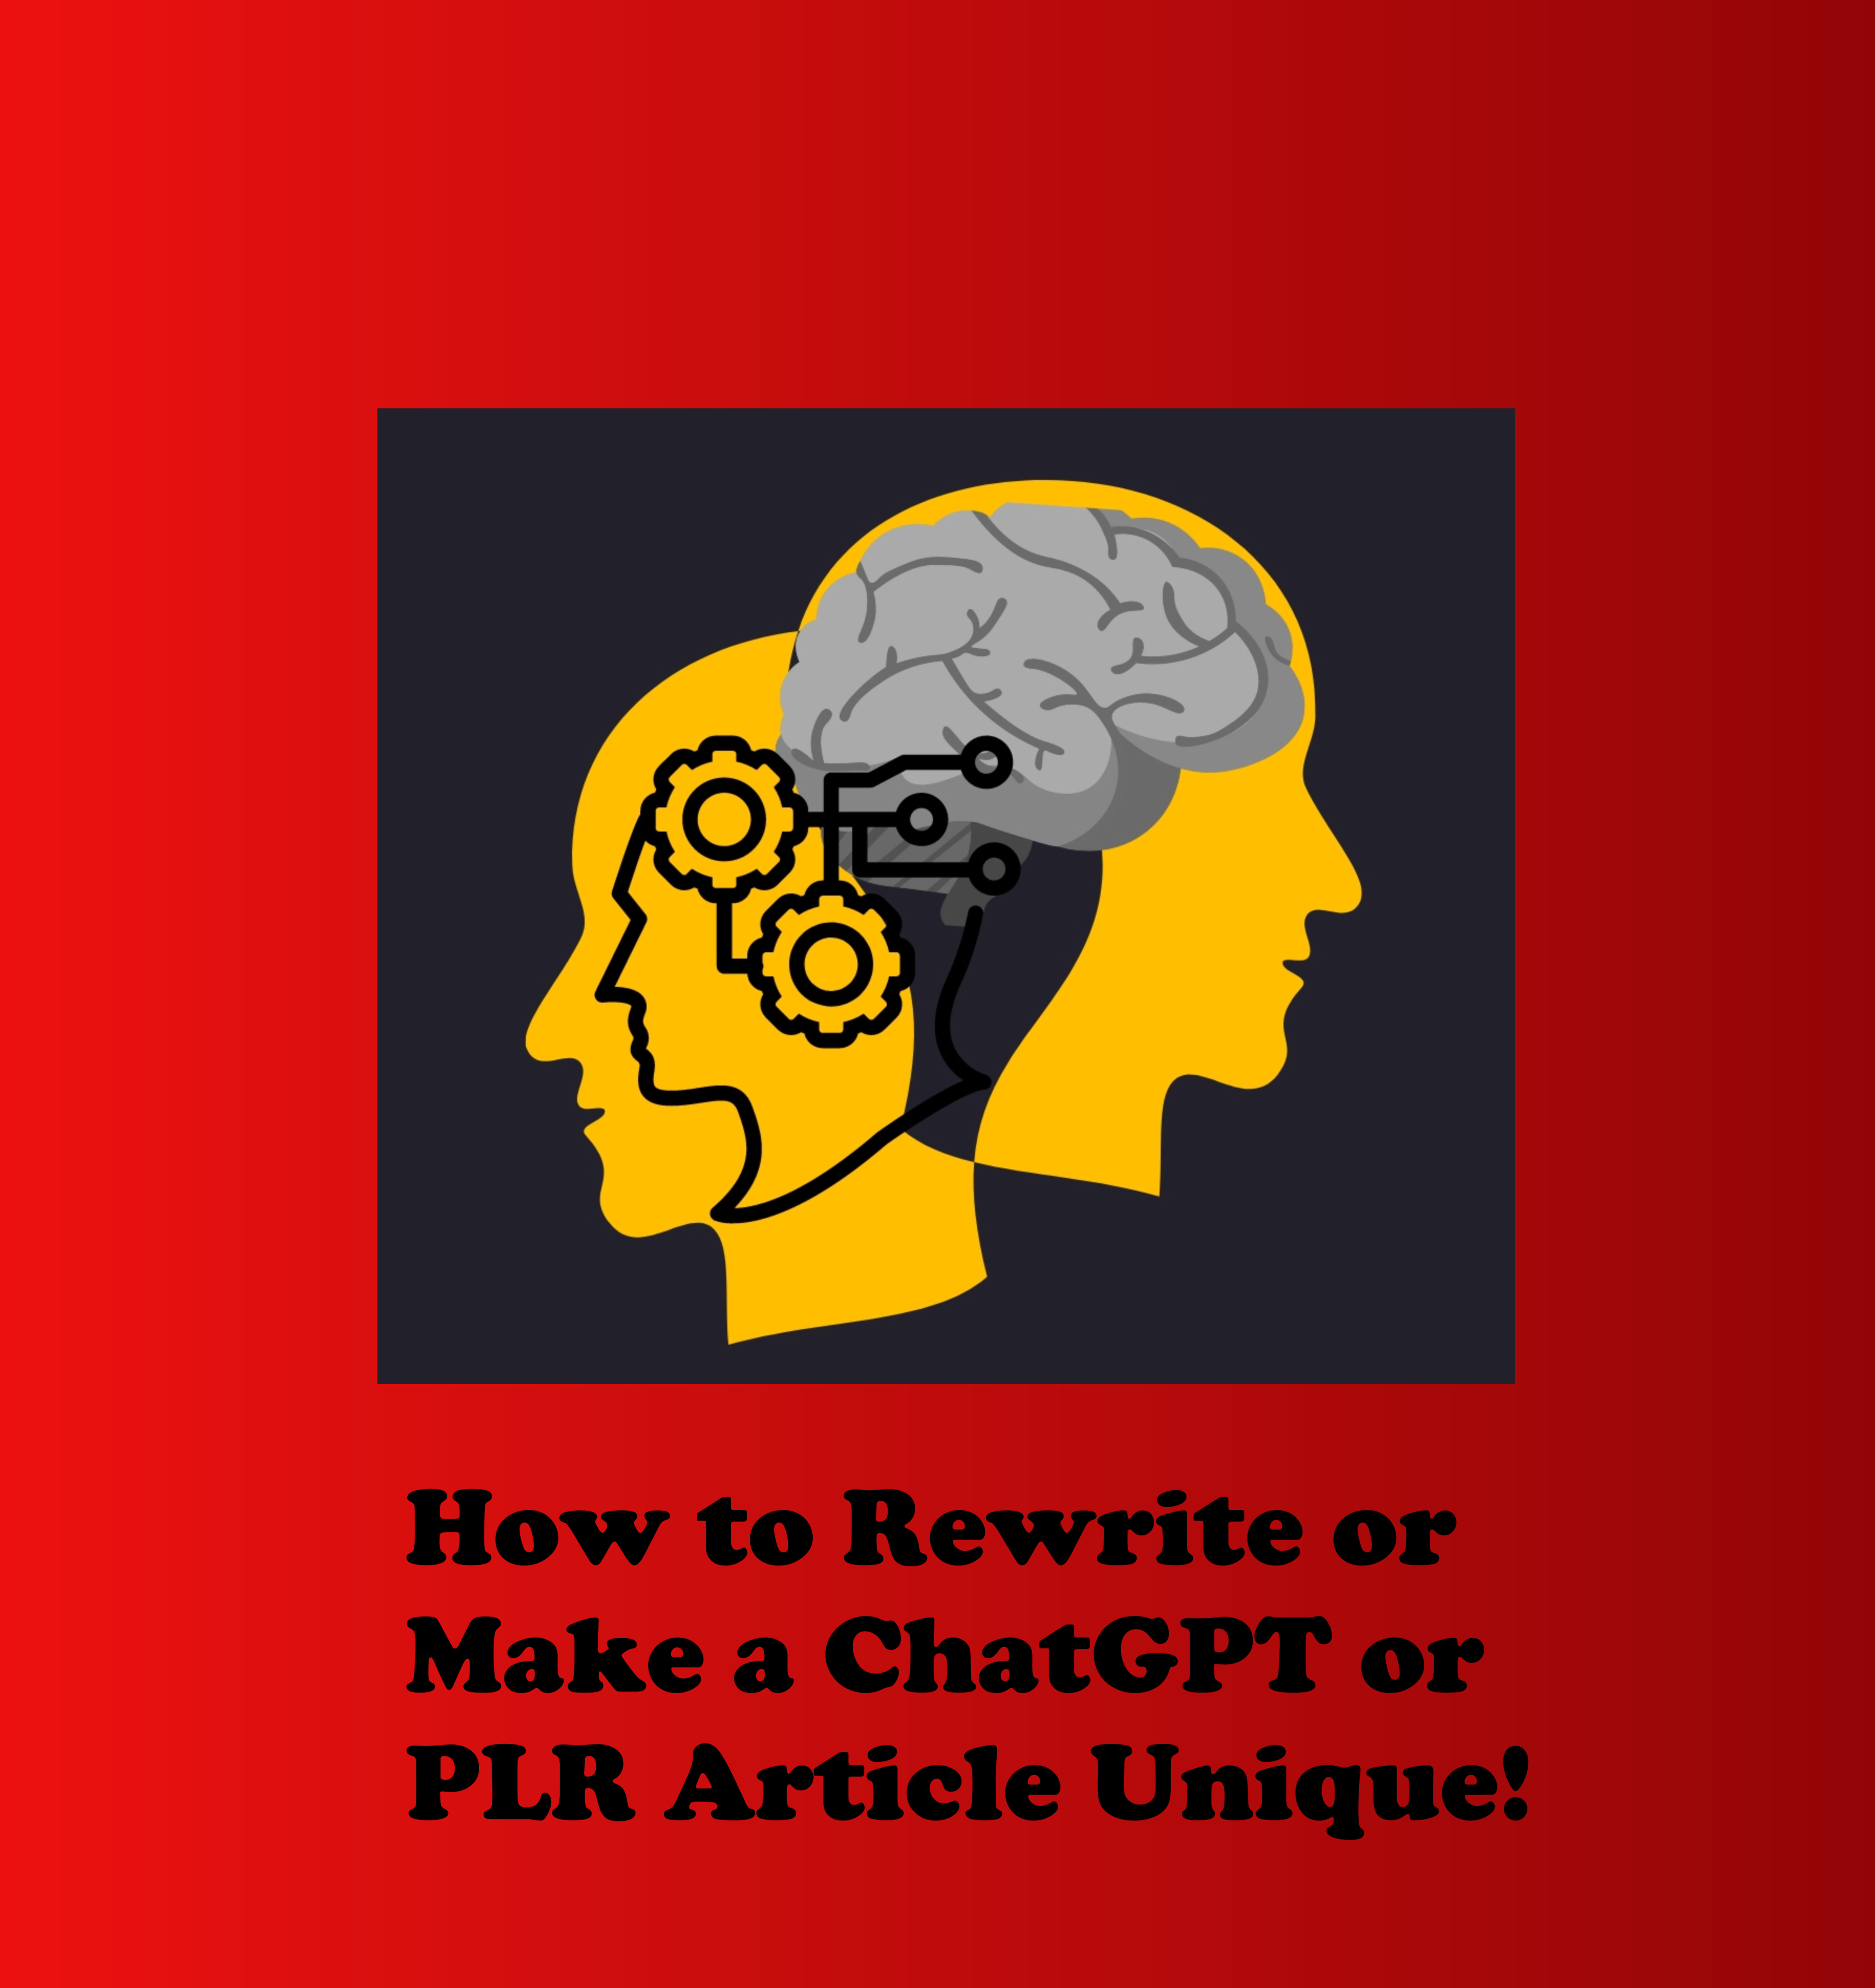 How to Rewrite or Make a ChatGPT or PLR Article Unique!